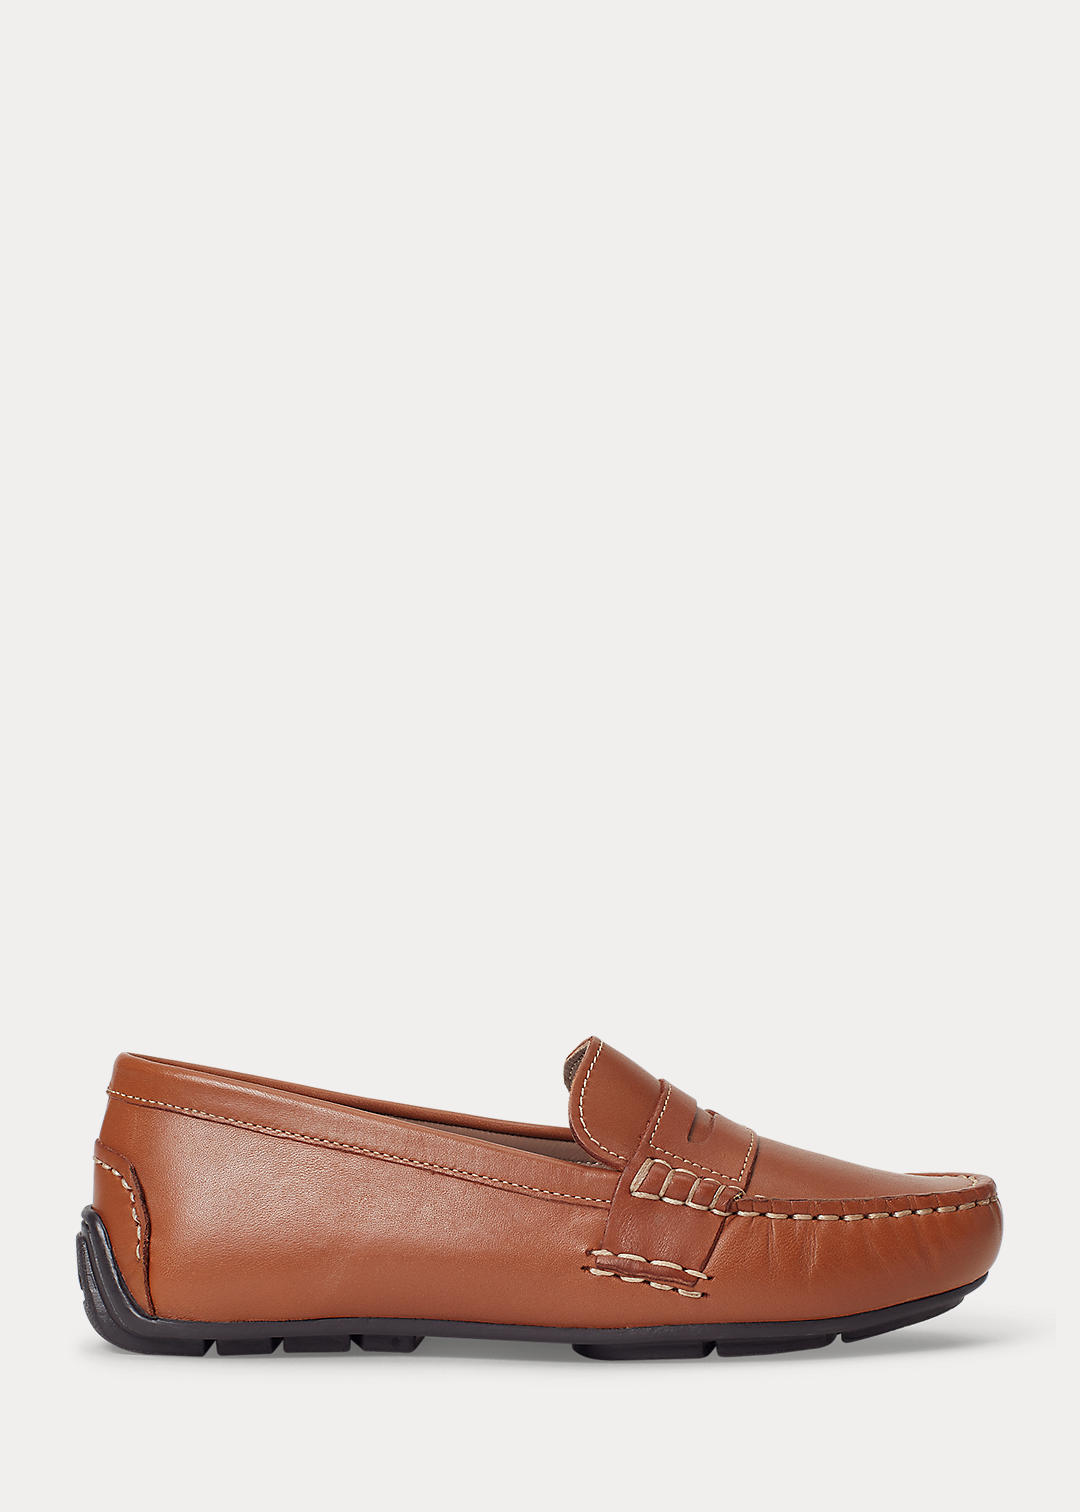 BOYS 1.5-6 YEARS Telly Leather Penny Loafer 1